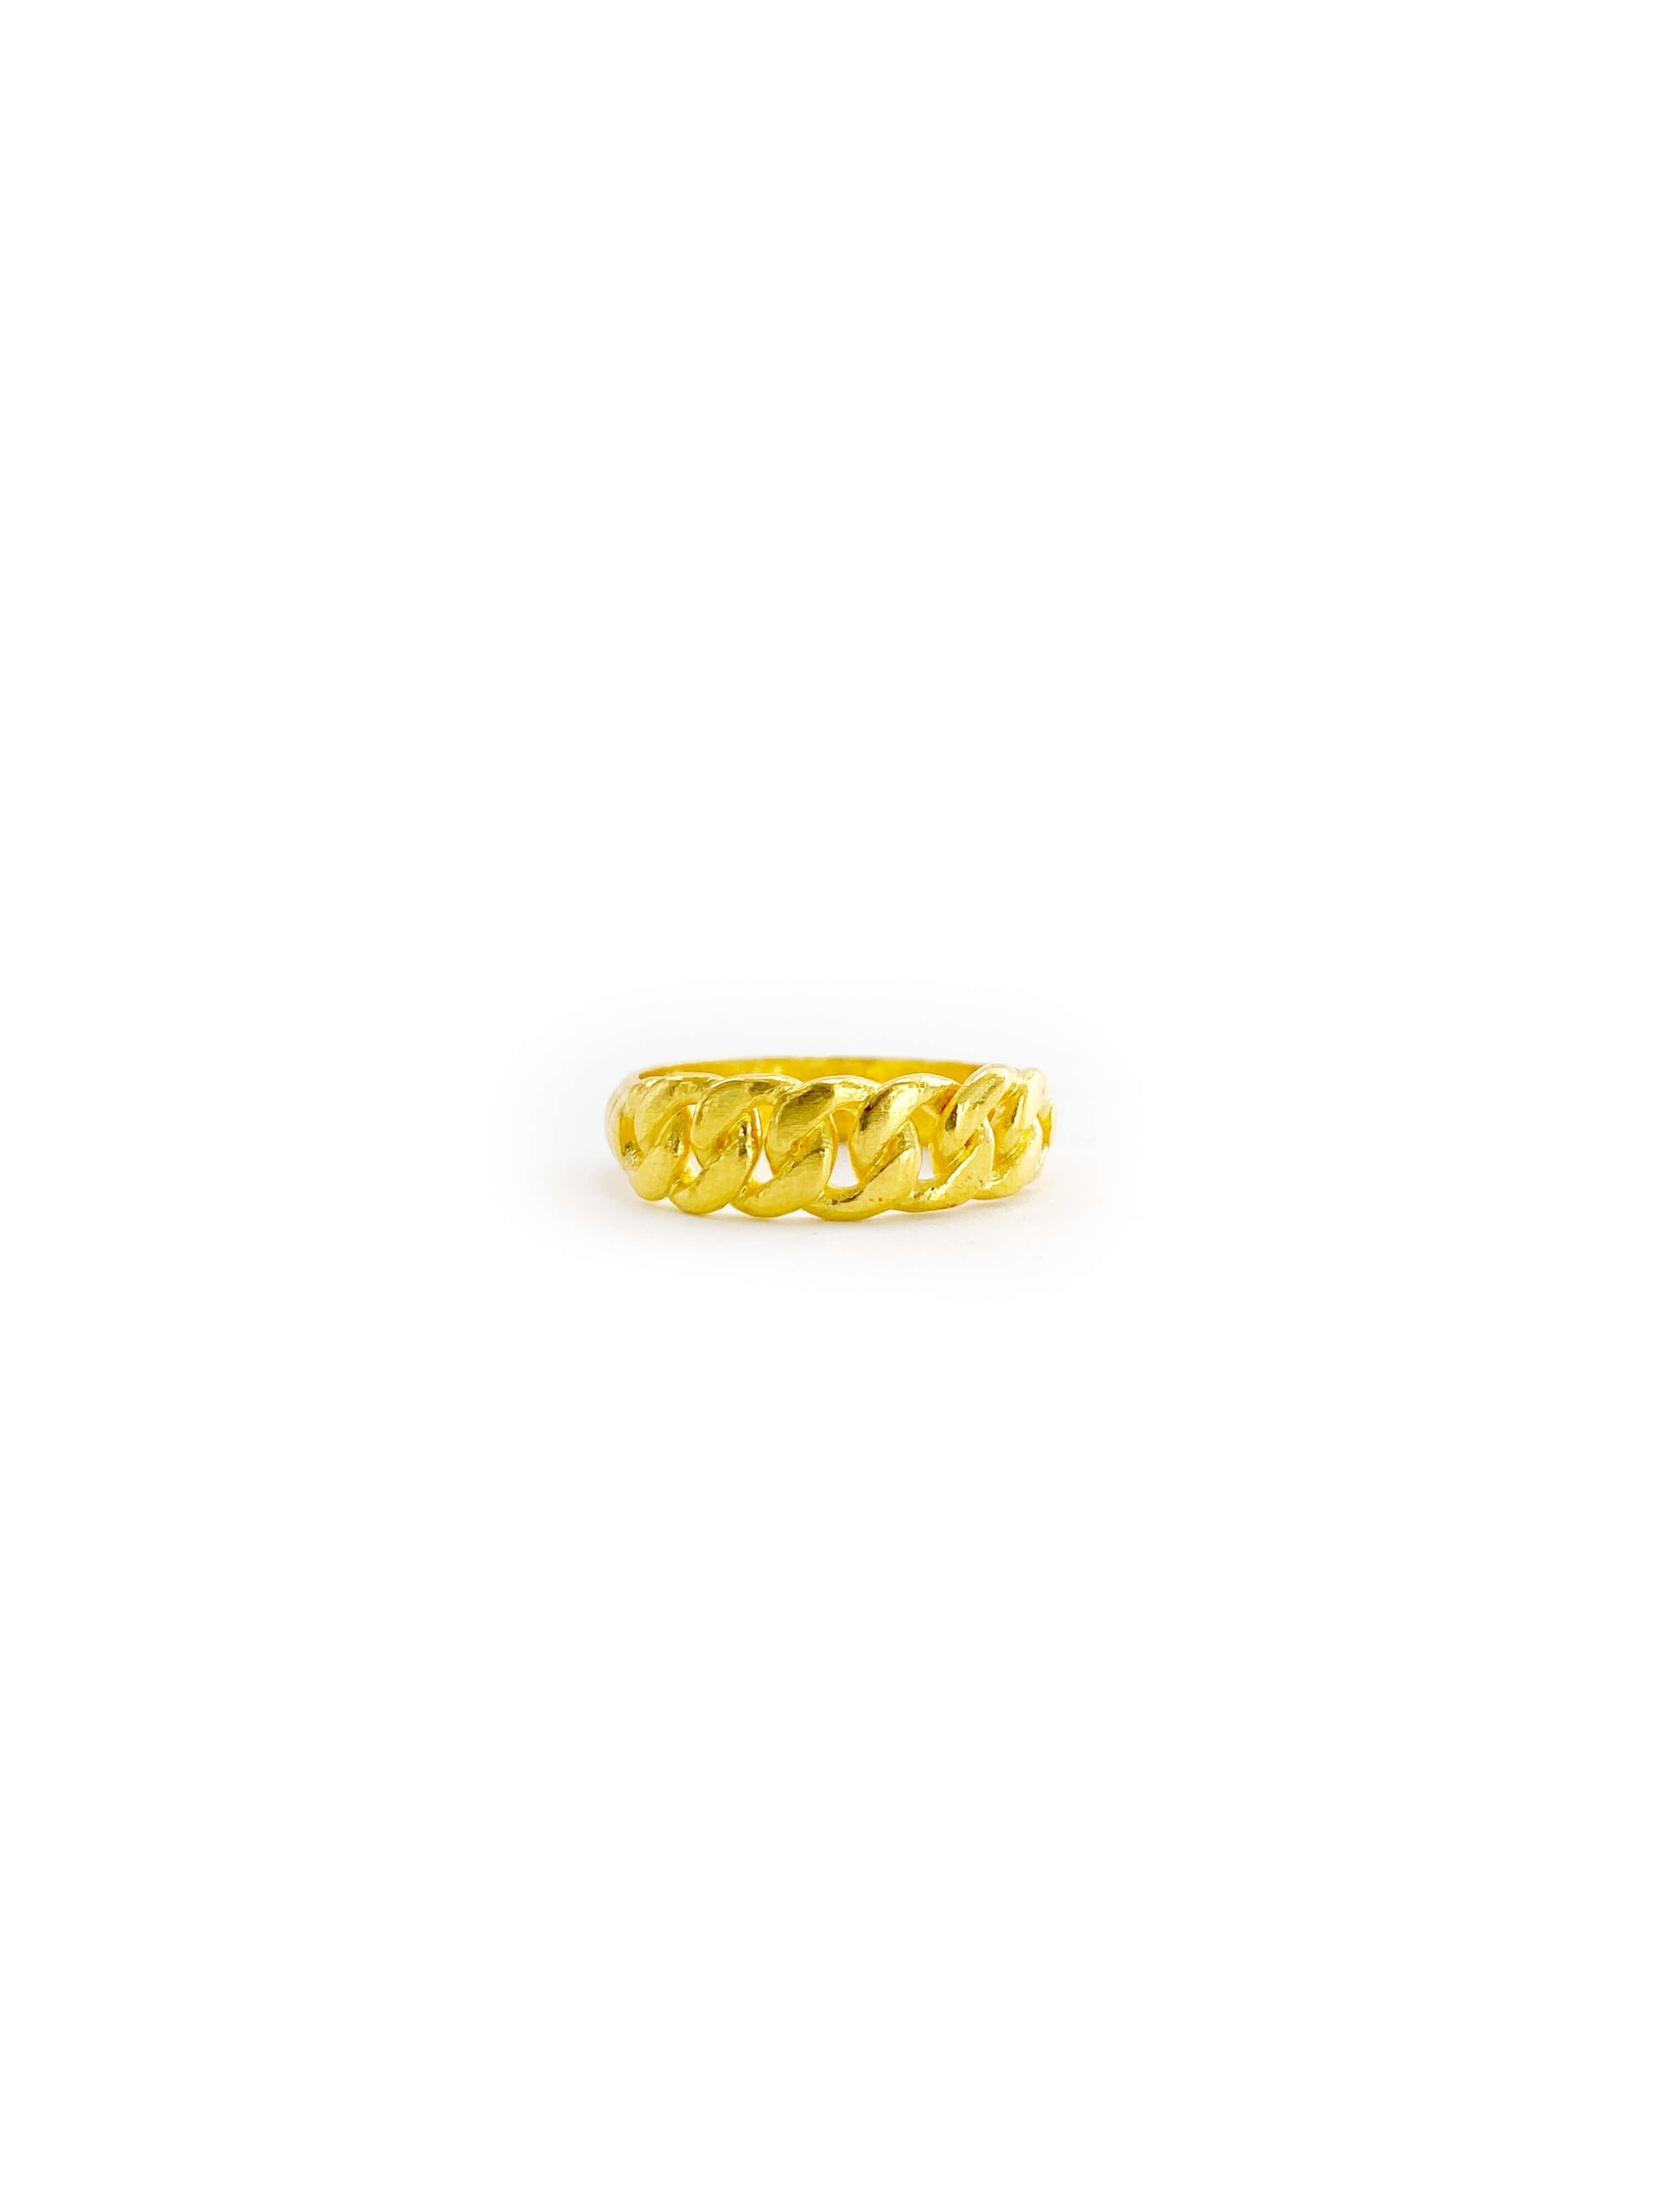 Cuban Link Ring. Cuban link rings are one of the most… | by Abdul Kader |  Medium